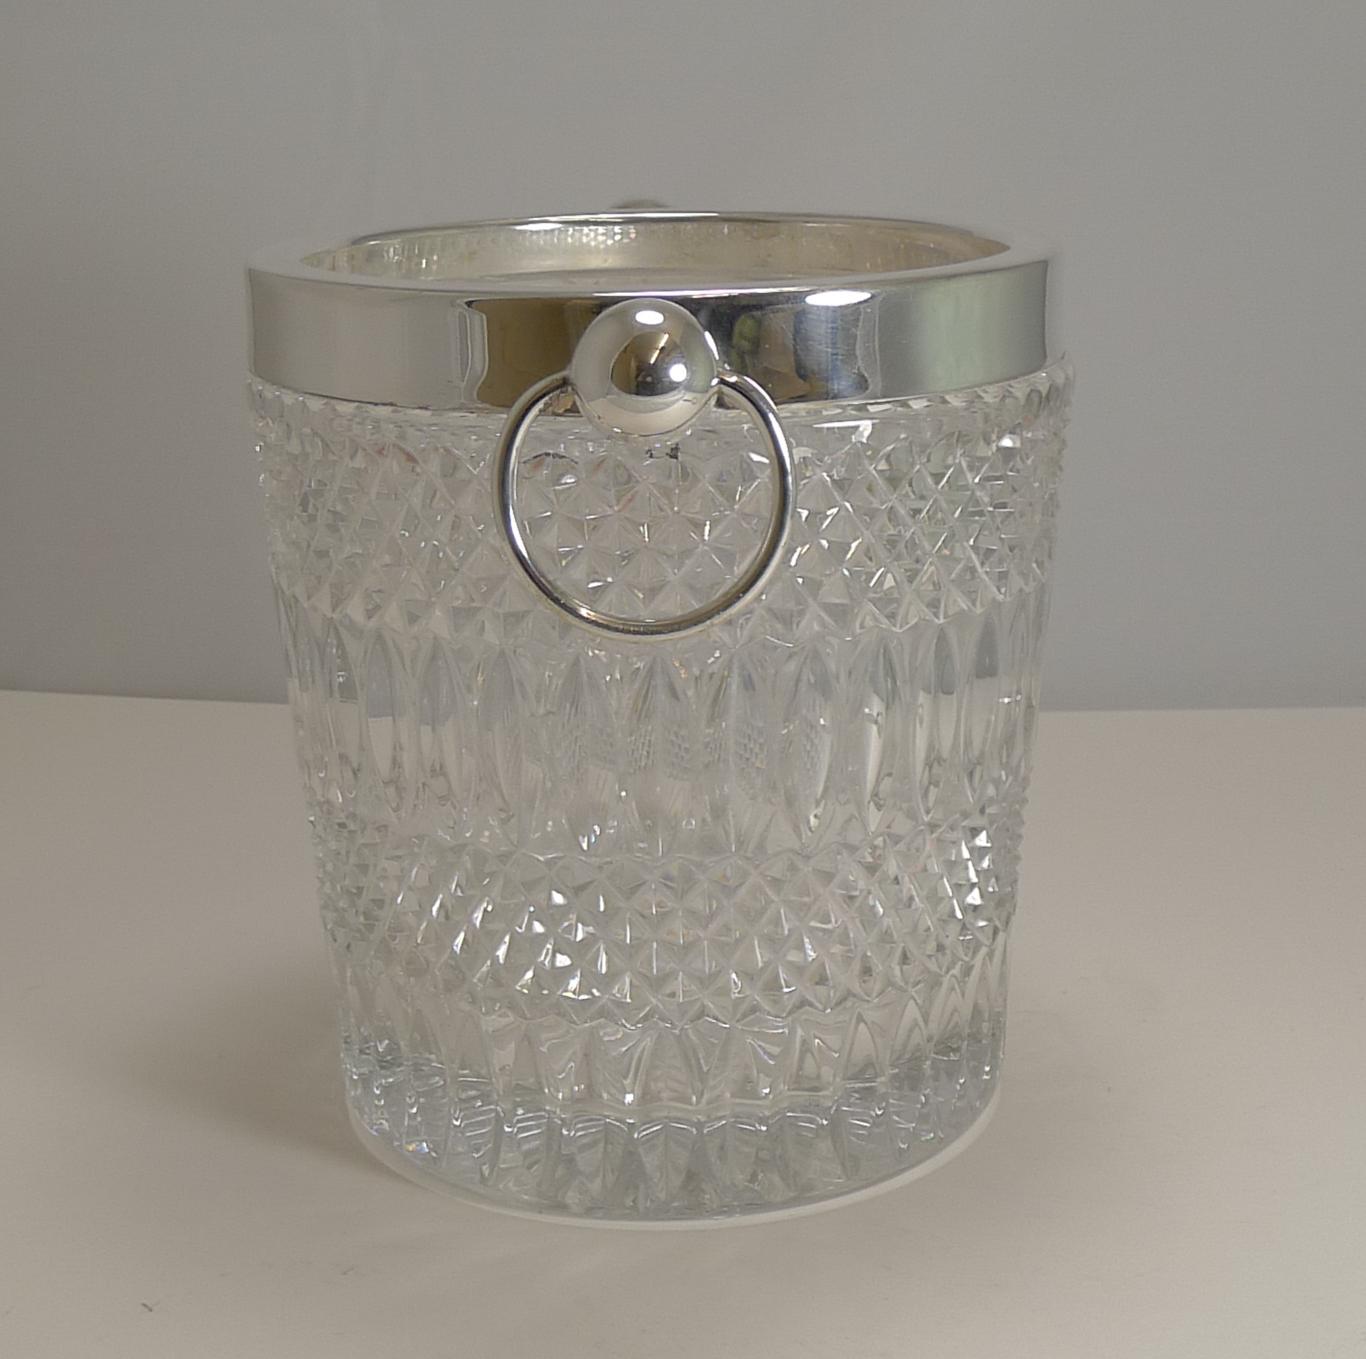 An extremely hefty piece of glass was used to create this stunning Mid-Century Modern wine cooler with silver plated fittings including a ring handle to each side.

European in origin, possibly Austrian or German dating to the 1960's in excellent